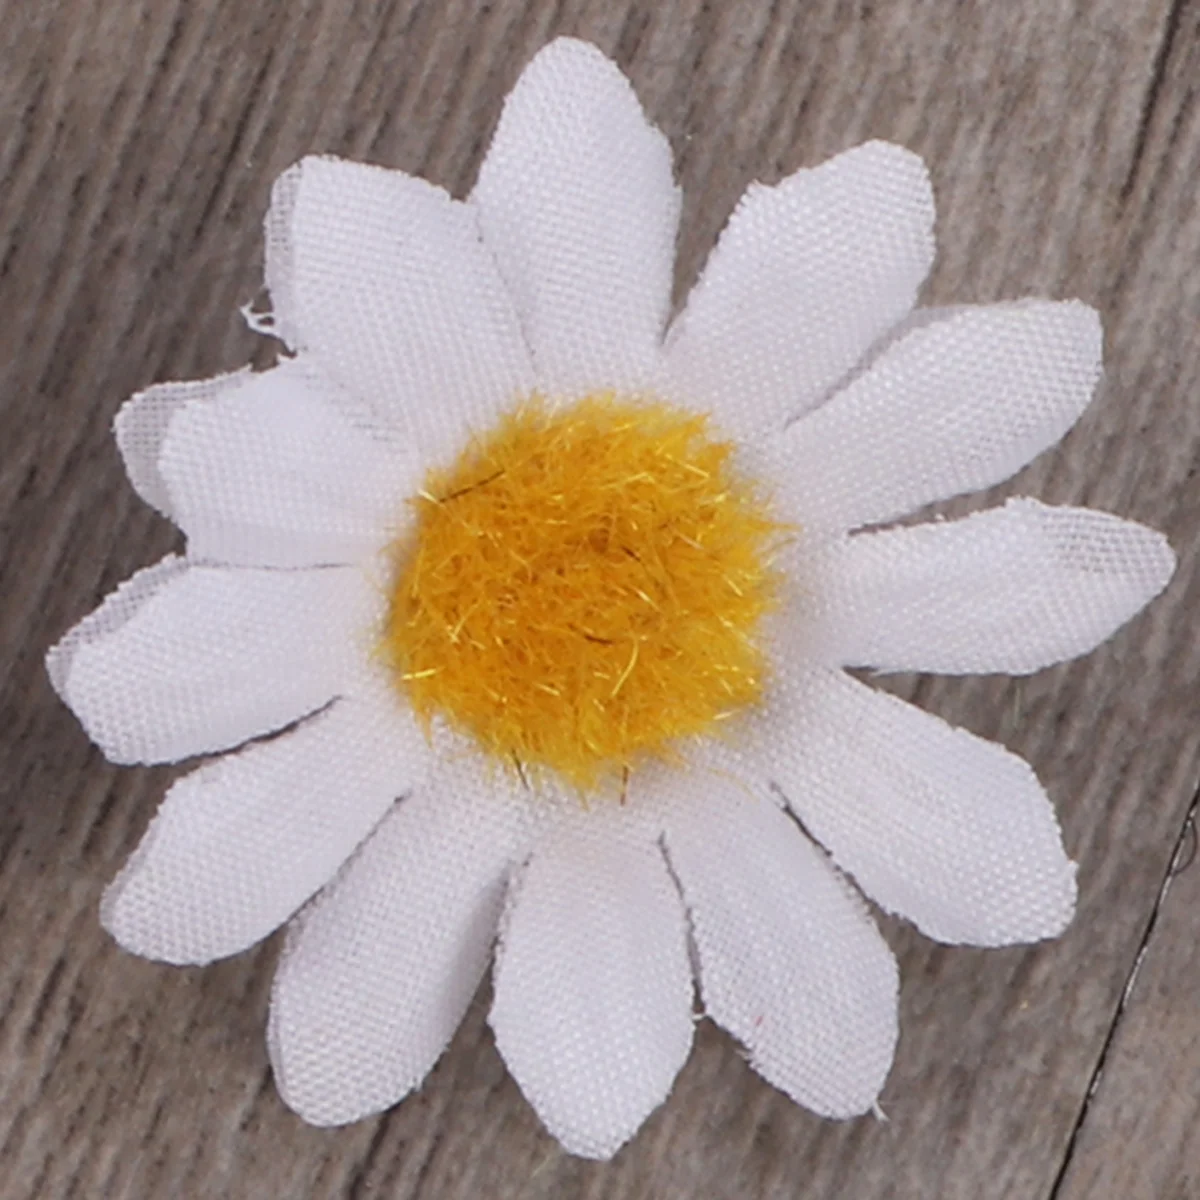 

Daisy Decorations Flowers Fake Party Flower Crafts Head Garland Cake Birthday Artificial Decor Petals